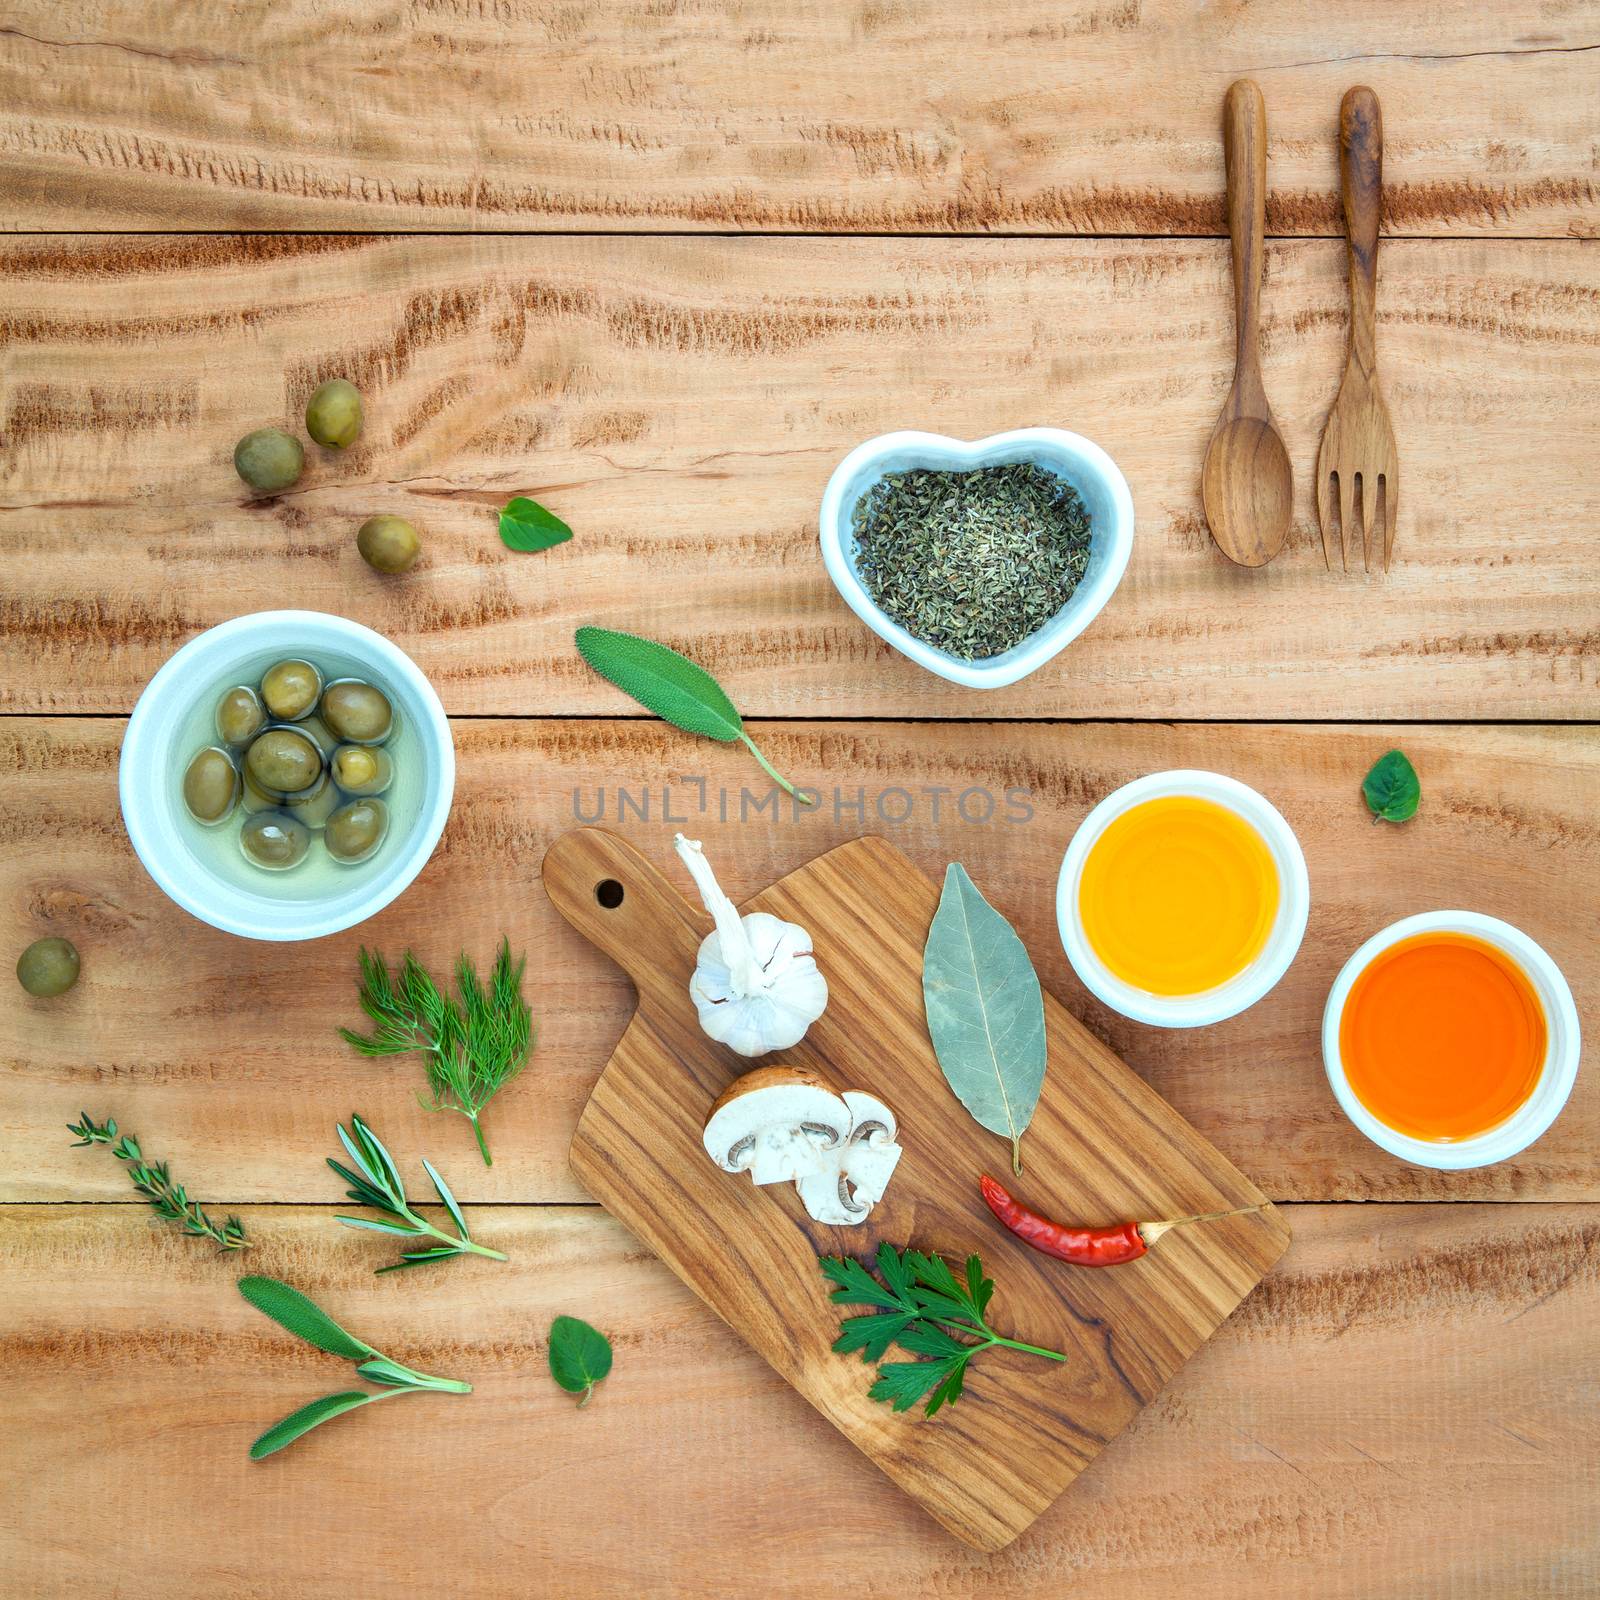 Different sorts of cooking oil,olive oil flavored and Sesame oil with  spices herbs rosemary ,thyme,dill,sage mint and parsley and wooden spoon set up with wooden background concept for international cuisine.